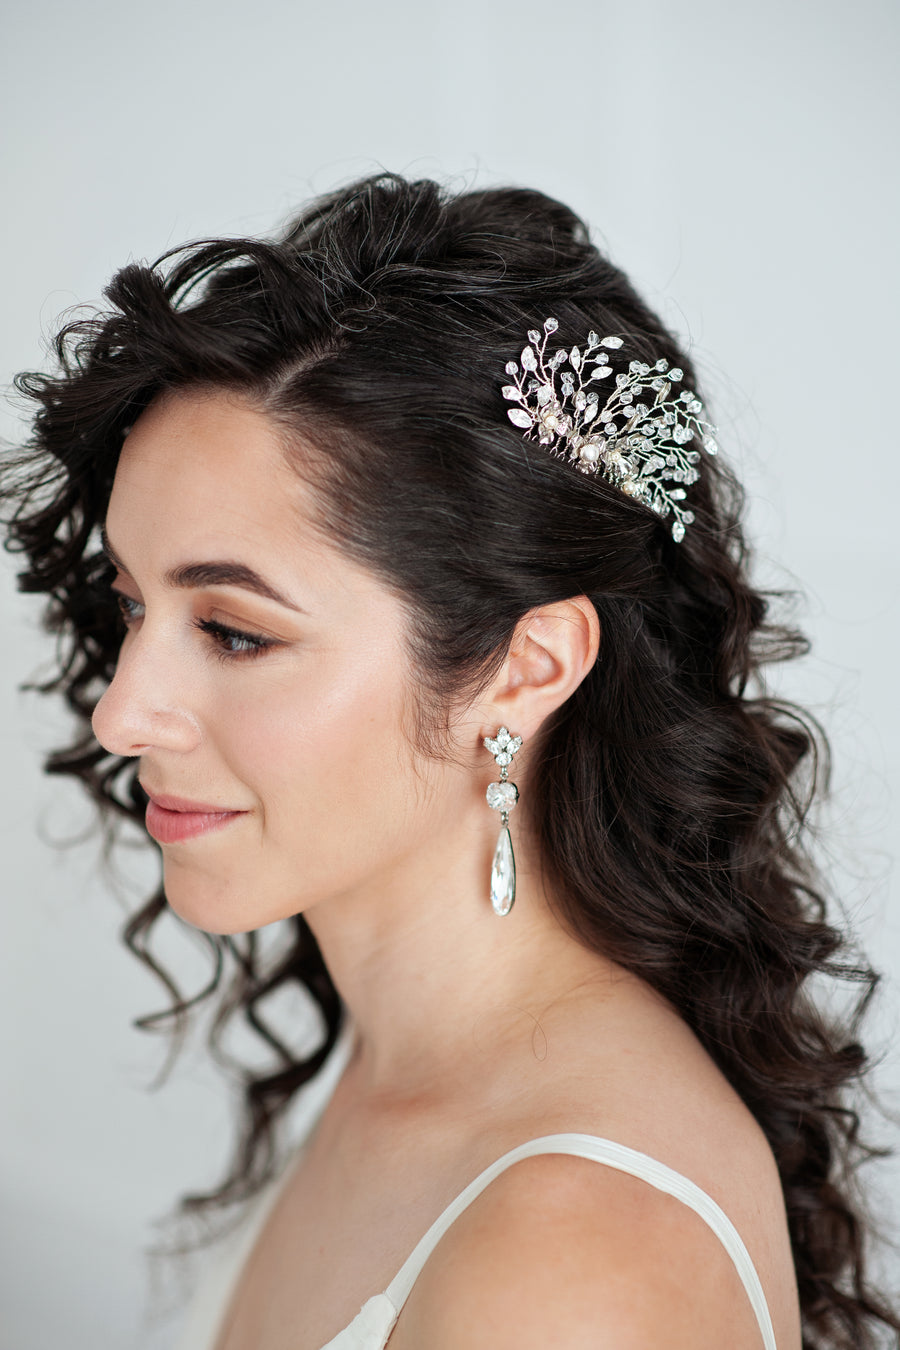 Bride wearing long Swarovski Crystal Earrings and vintage bridal comb in silver and crystal.